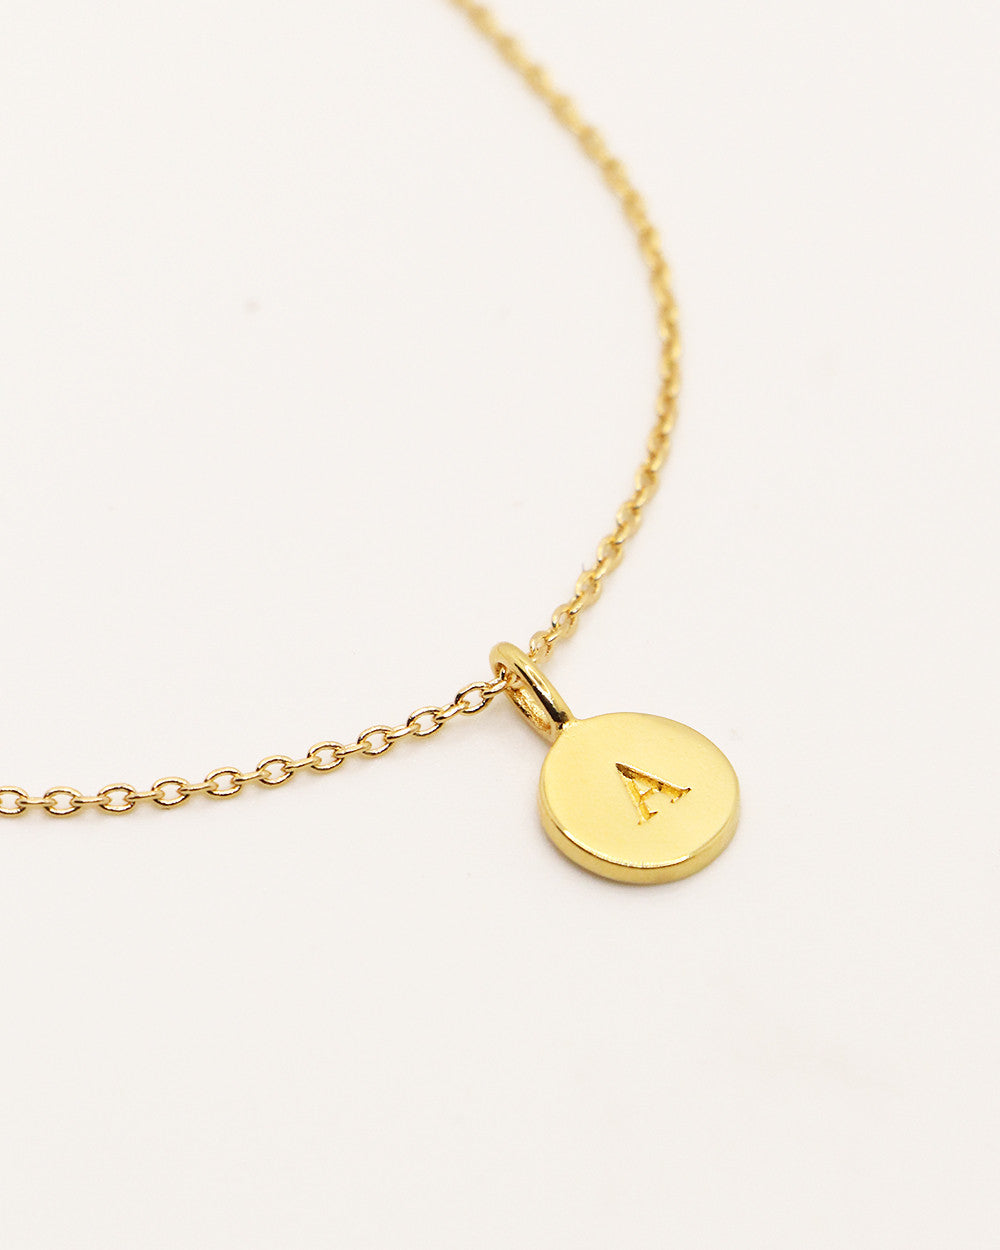 Short chain necklace (alone)